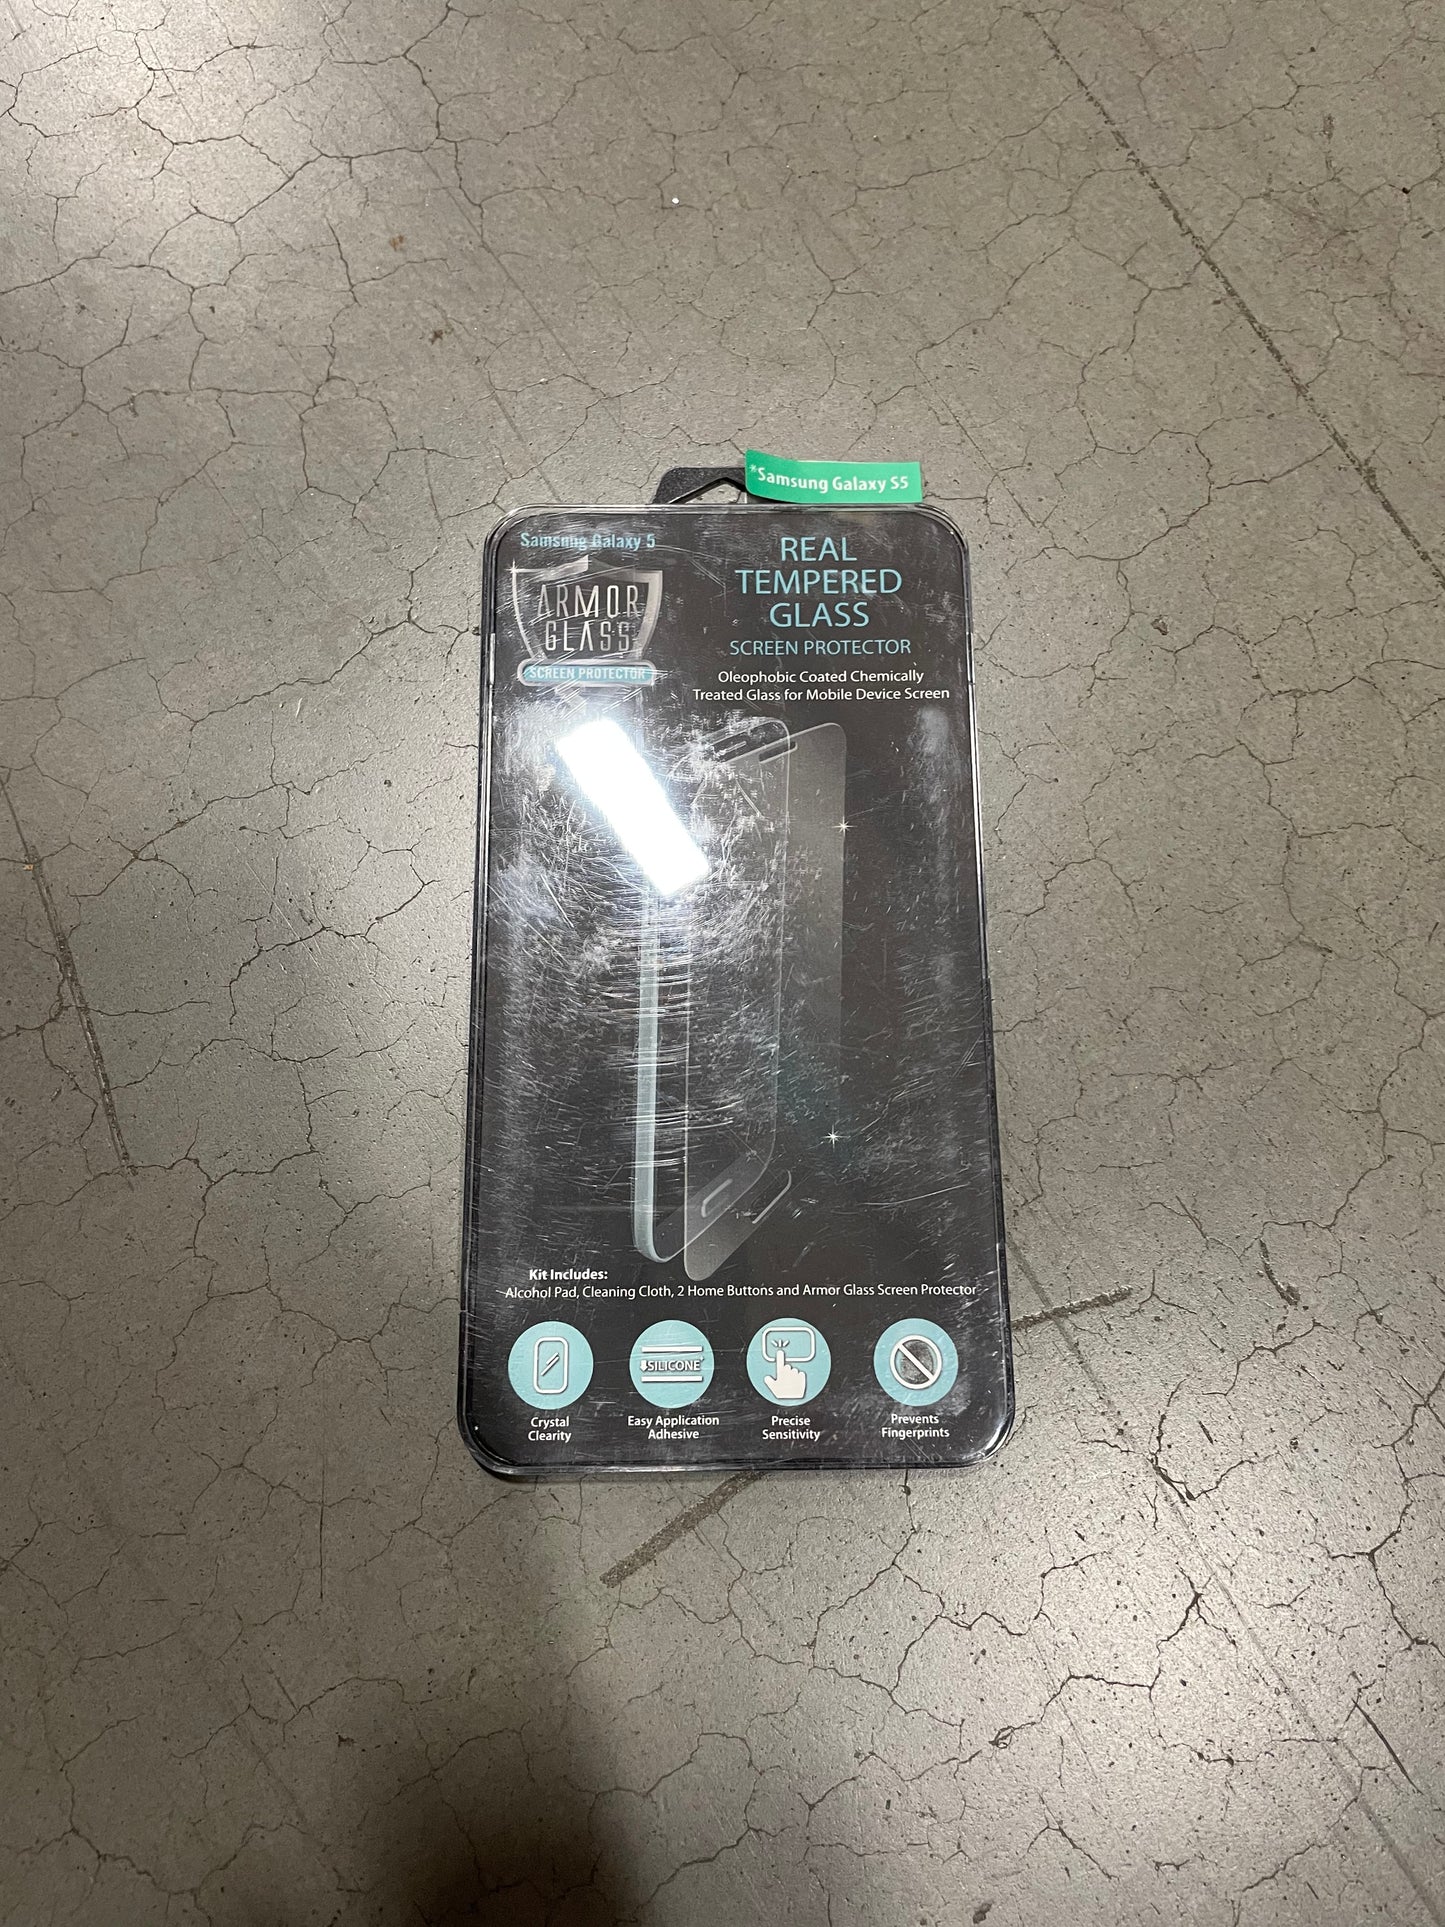 ITEM NUMBER 020334L SS5 PROTECT GLASS SCREEN - STORE SURPLUS NO DISPLAY 6 PIECES PER PACK